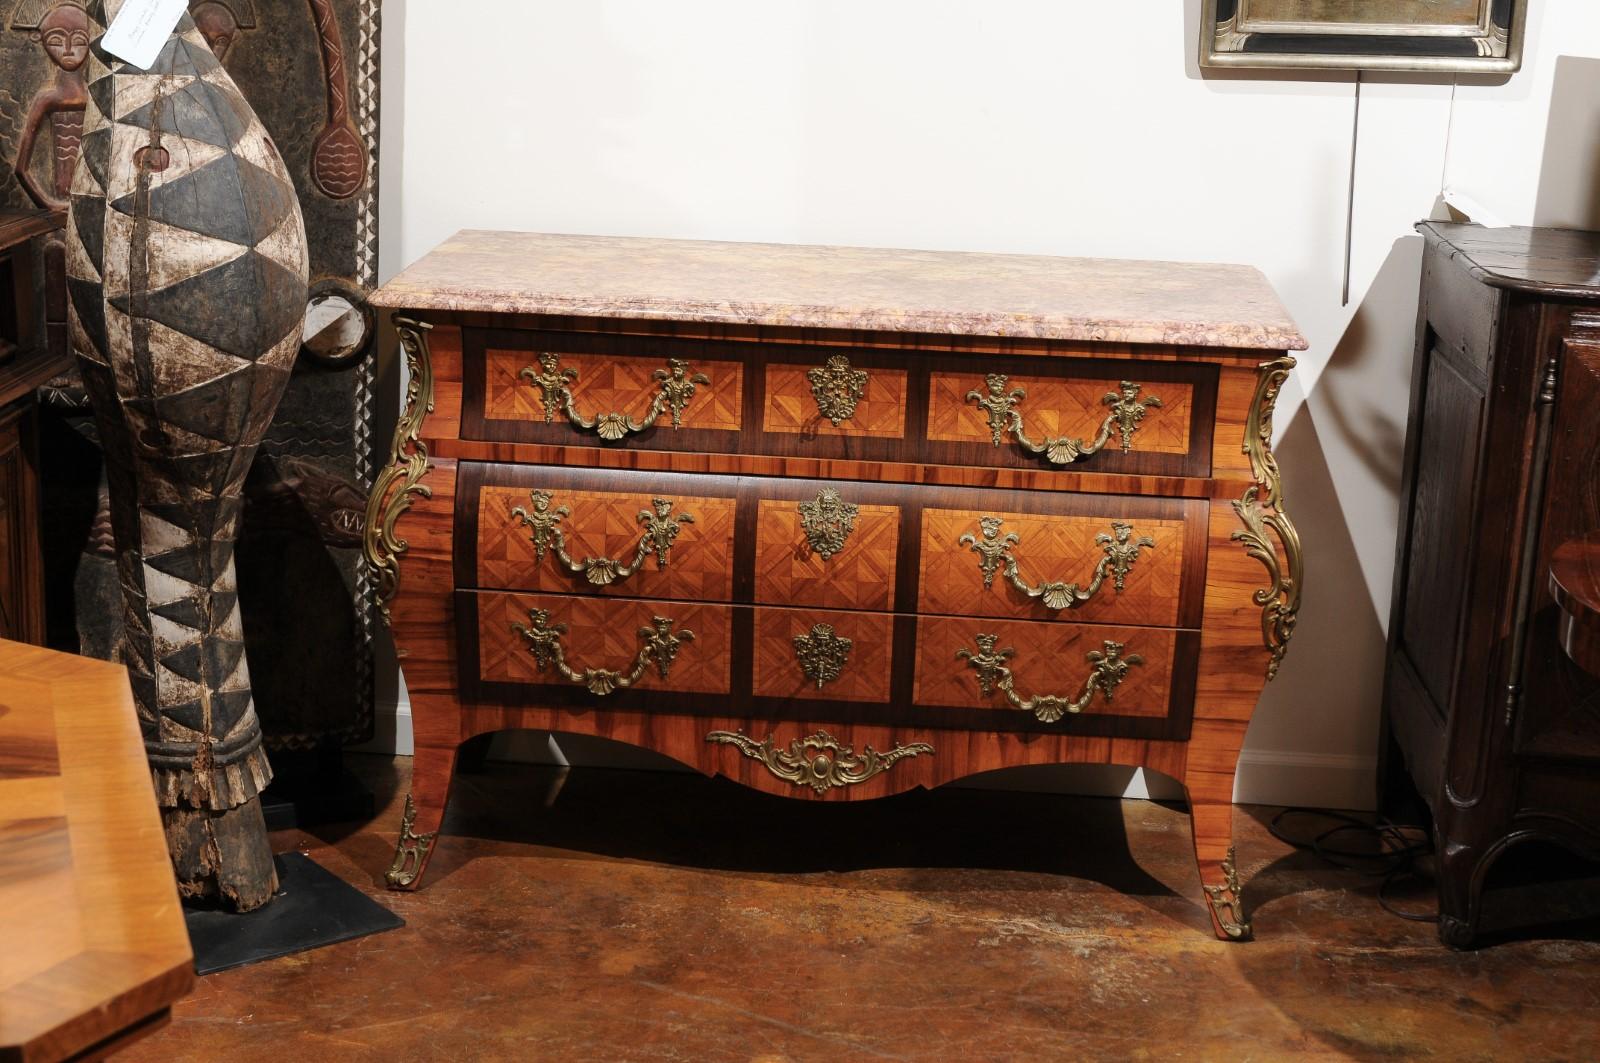 A French Rococo style bombé marquetry inlaid commode from the early 20th century, with marble top and bronze hardware. This exquisite French Rococo style three-drawer commode features a rectangular variegated marble top with bevelled edges, sitting